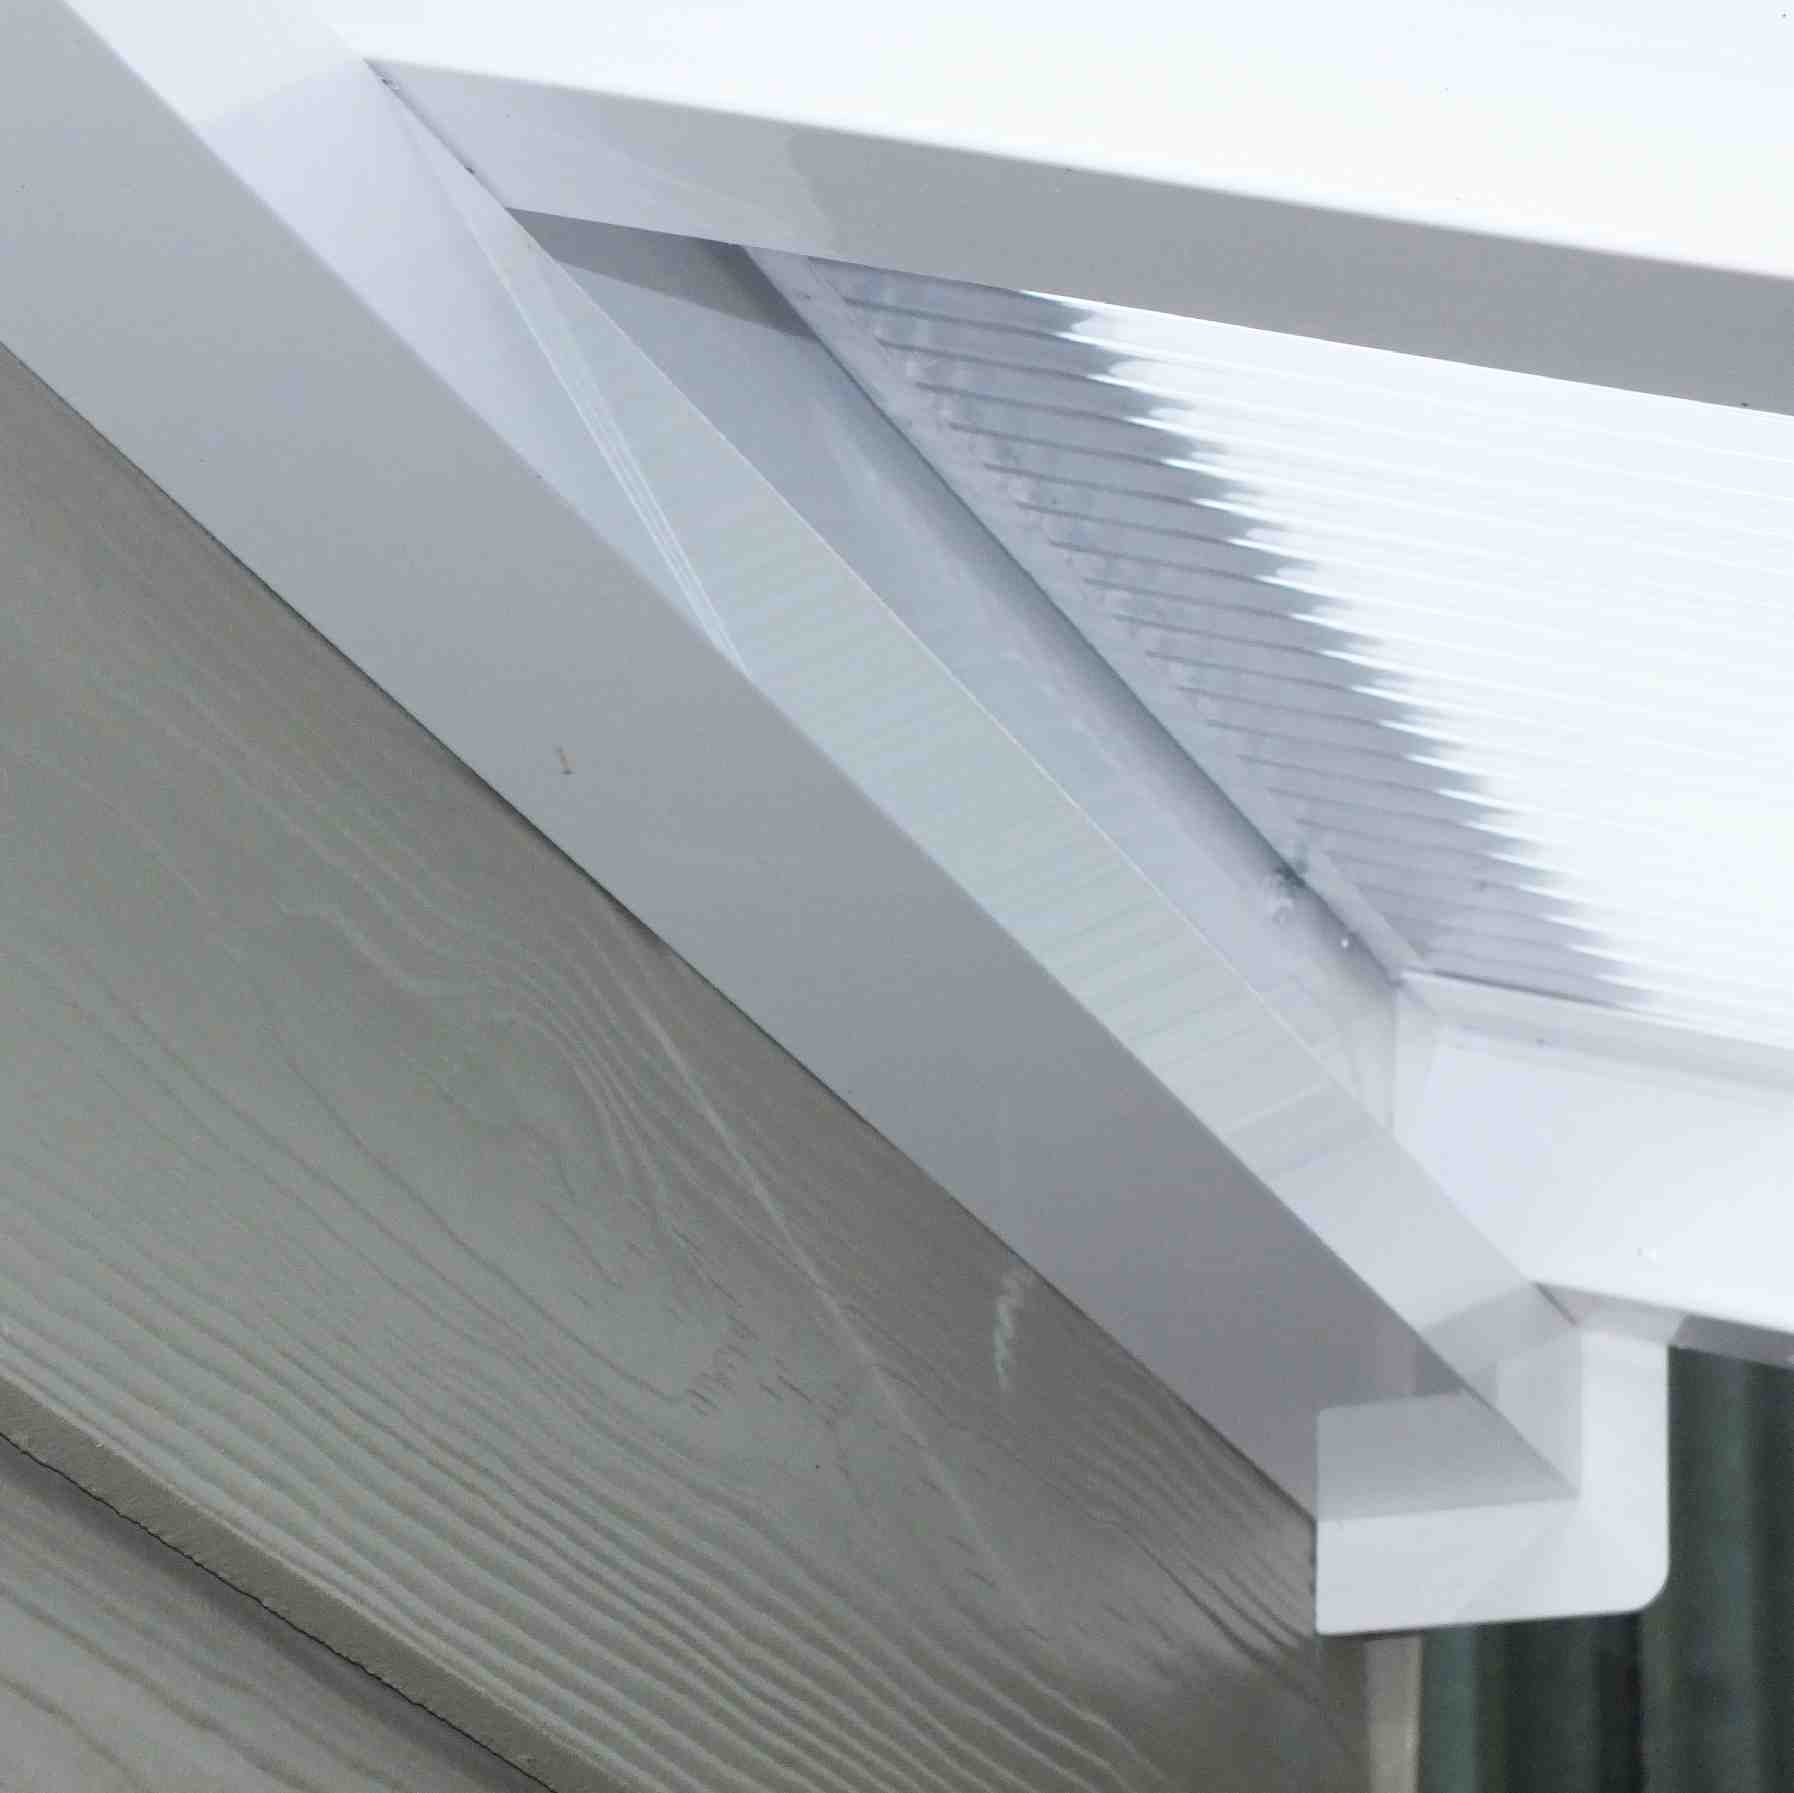 Great deals on Omega Verandah White with 16mm Polycarbonate Glazing - 6.0m (W) x 4.5m (P), (3) Supporting Posts